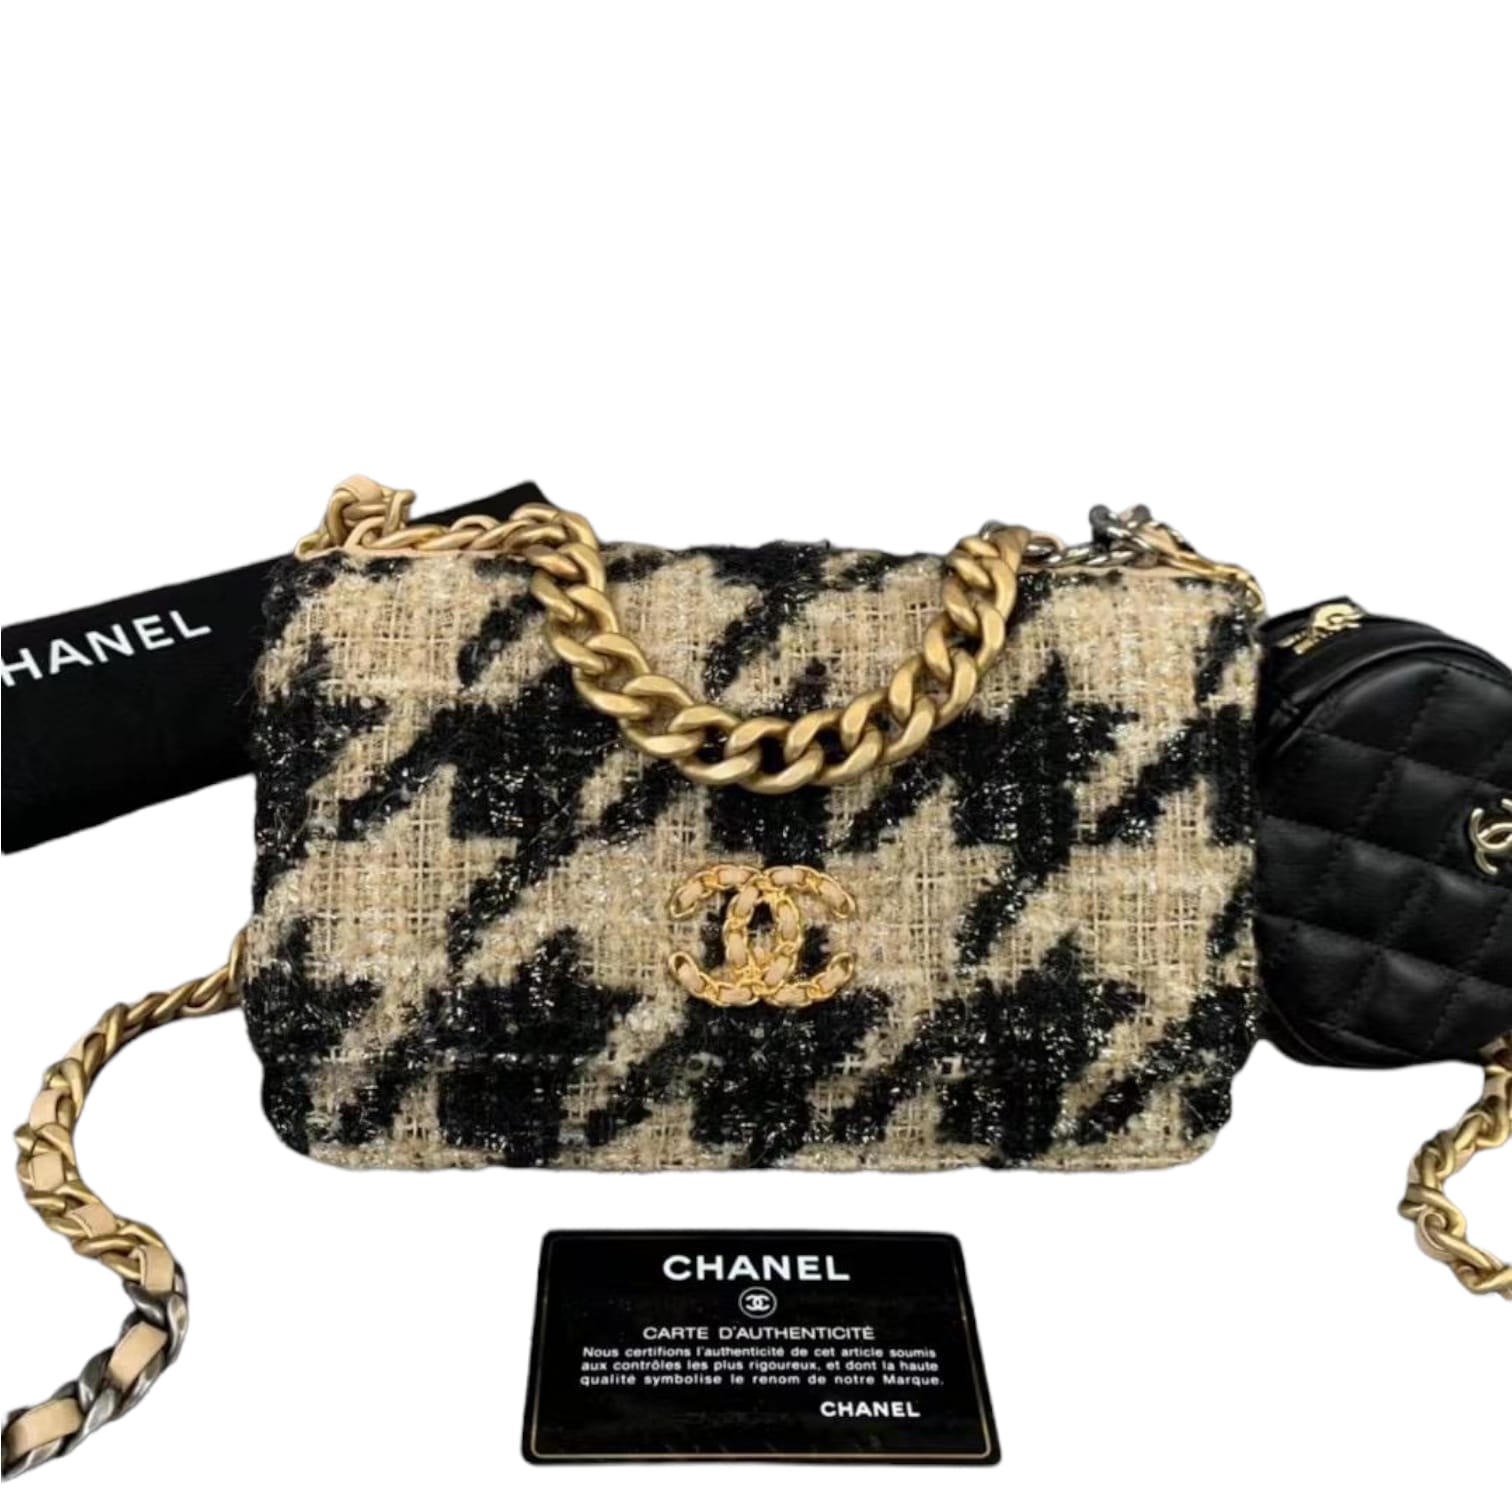 Q&A #55: Chanel Tweed Bag, Storing Chanel 19 Bag, Travelling with